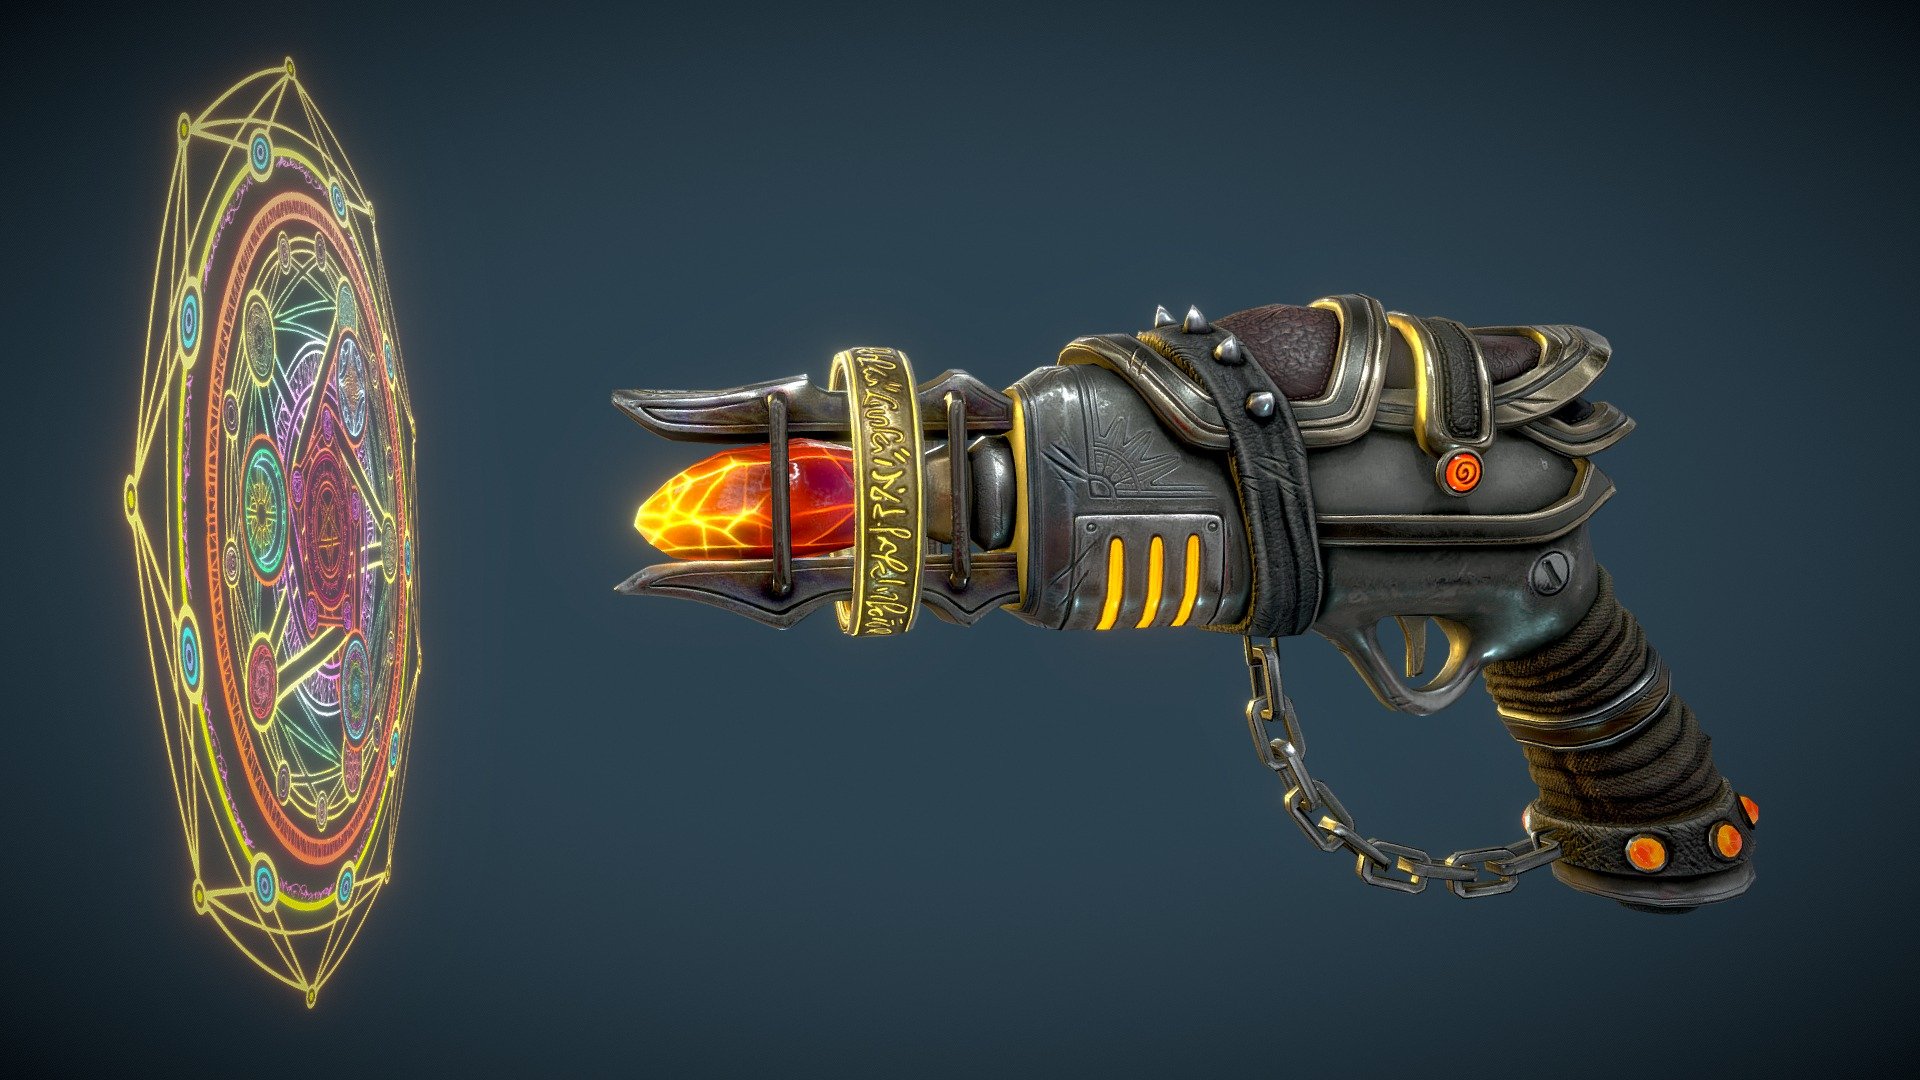 Dark Magic Gun - a practice model with simple animation. I learned a lot working on it :)

Made with Blender, Photoshop, 3dsMax and Substance Painter 3d model